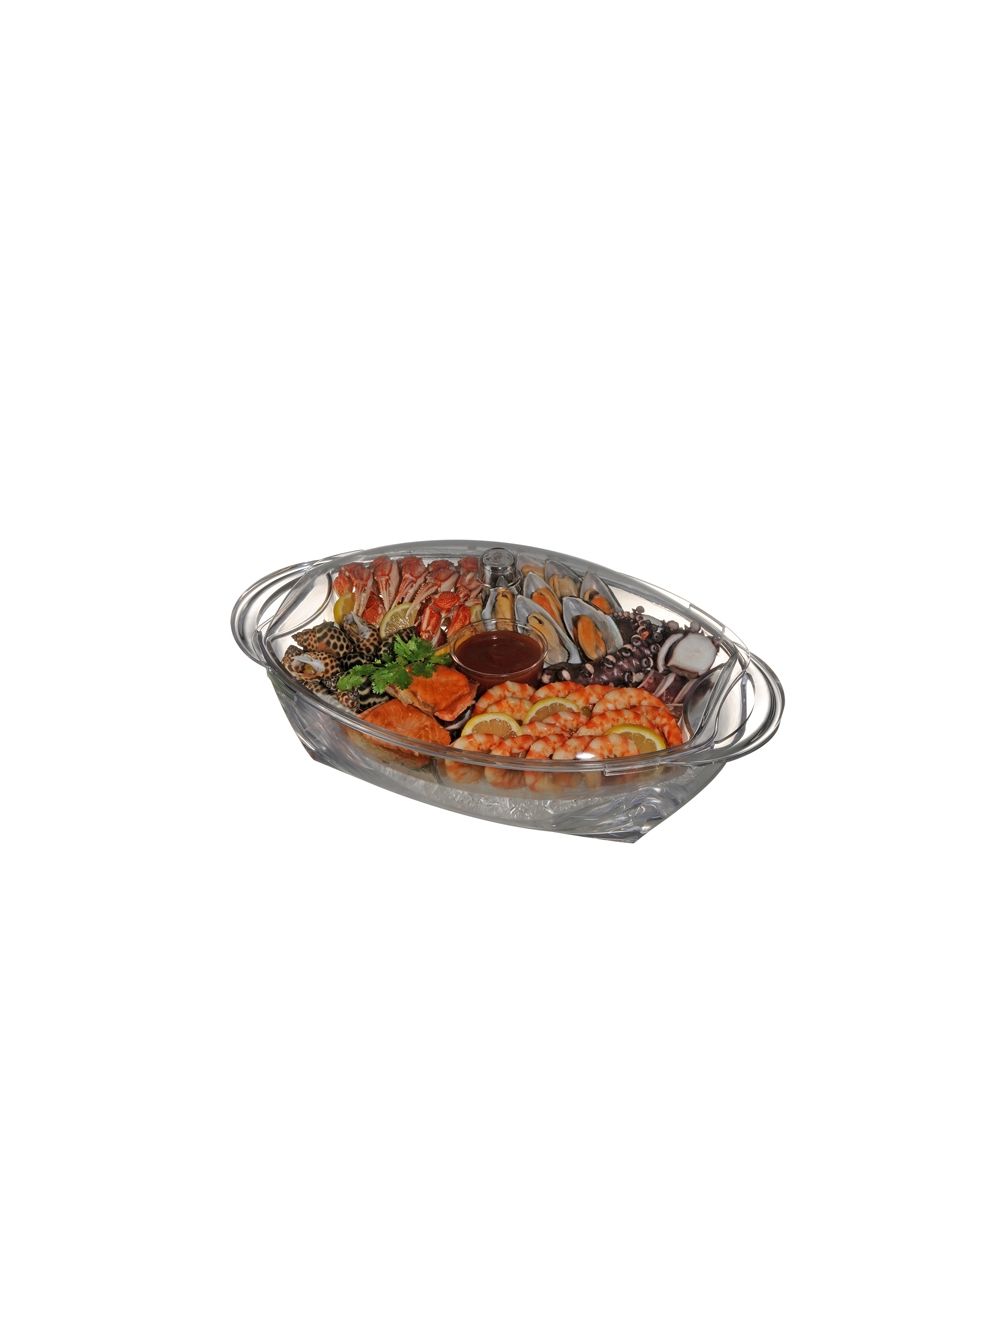 Hec Seafood Platter With Dome Lid